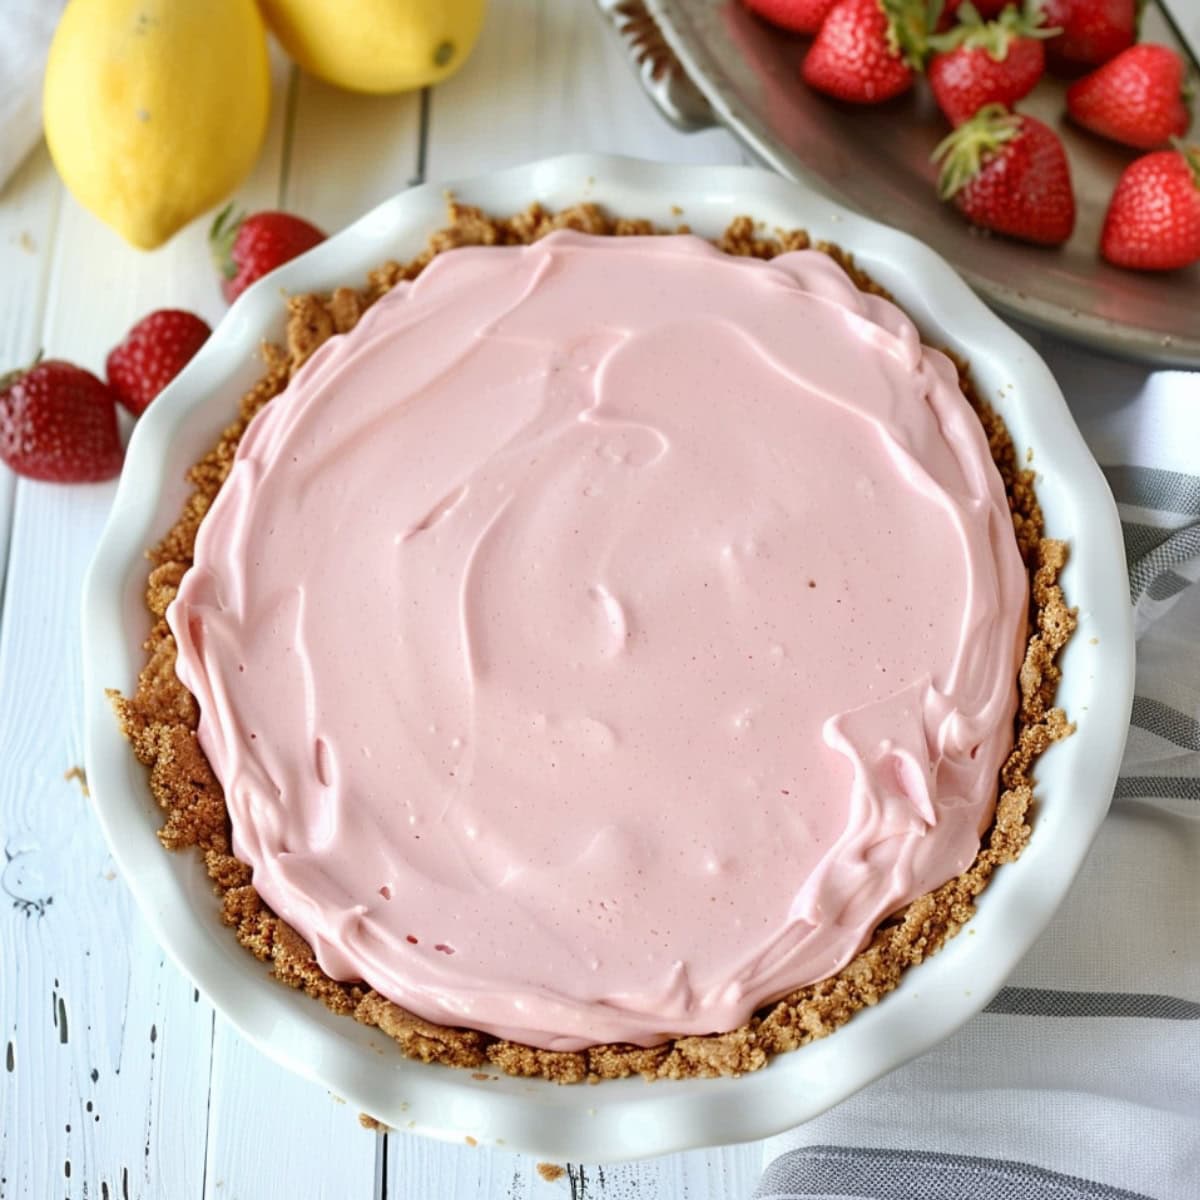 Whole creamy frozen strawberry lemonade pie on a round baking dish on wooden table.